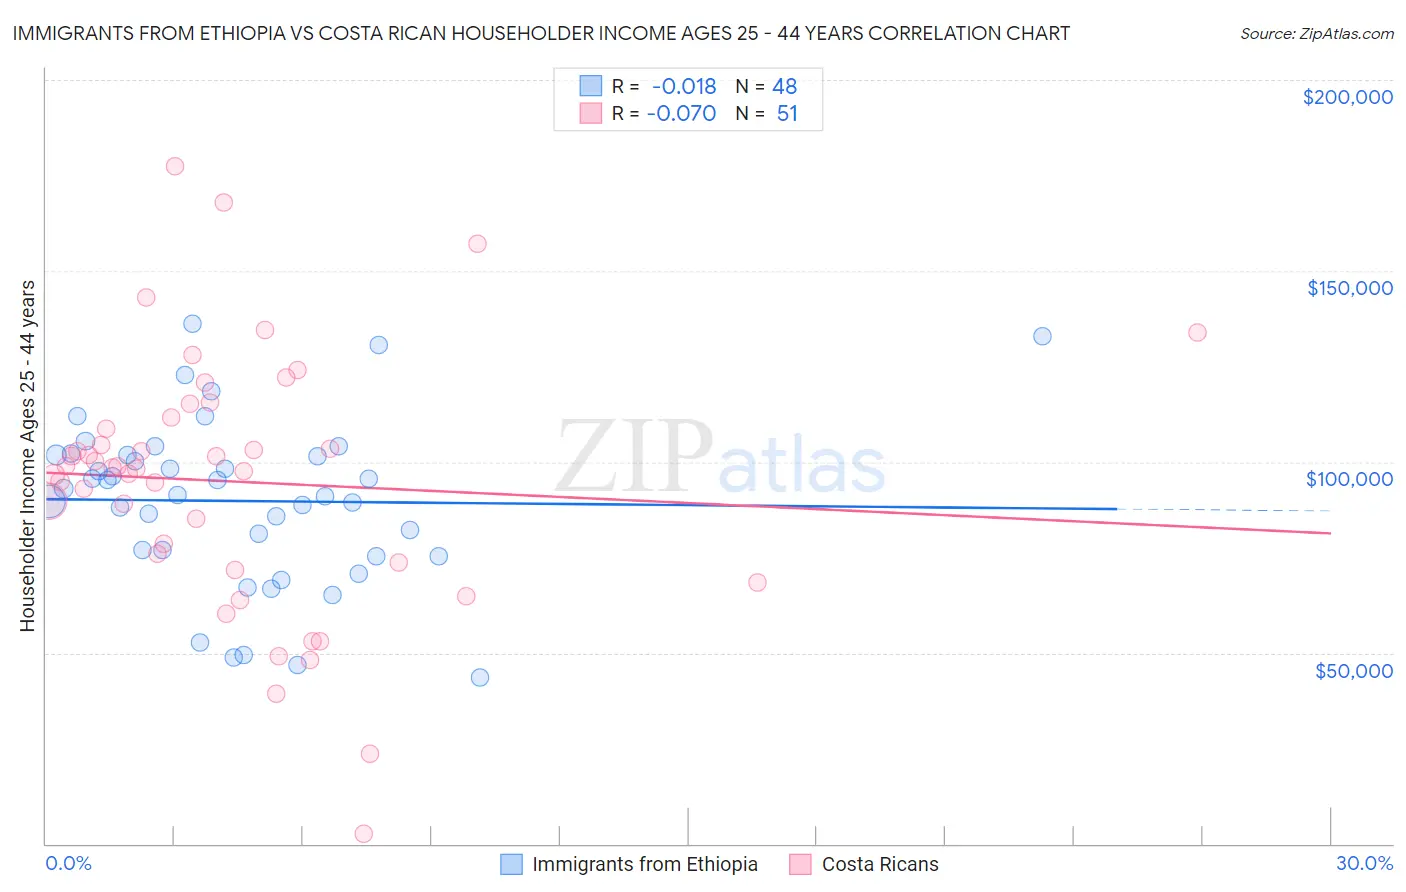 Immigrants from Ethiopia vs Costa Rican Householder Income Ages 25 - 44 years